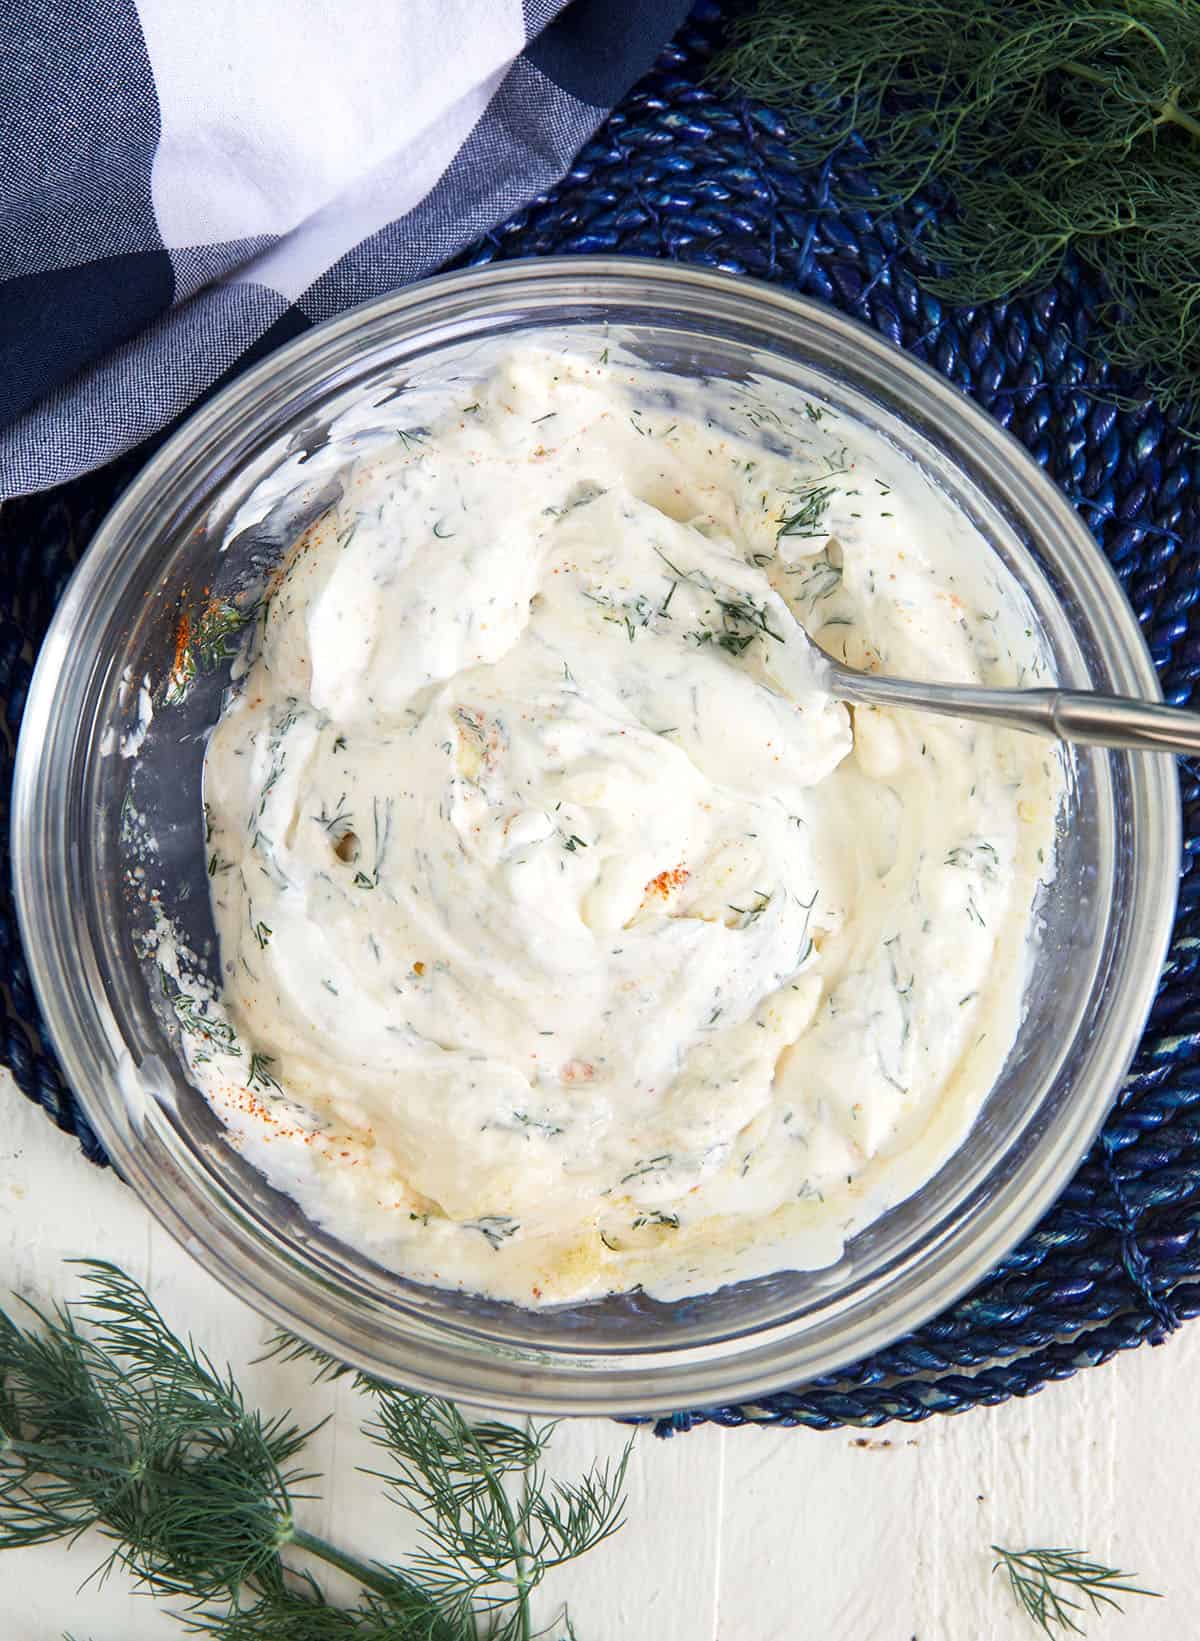 Dill dip has been mixed together in a glass bowl.